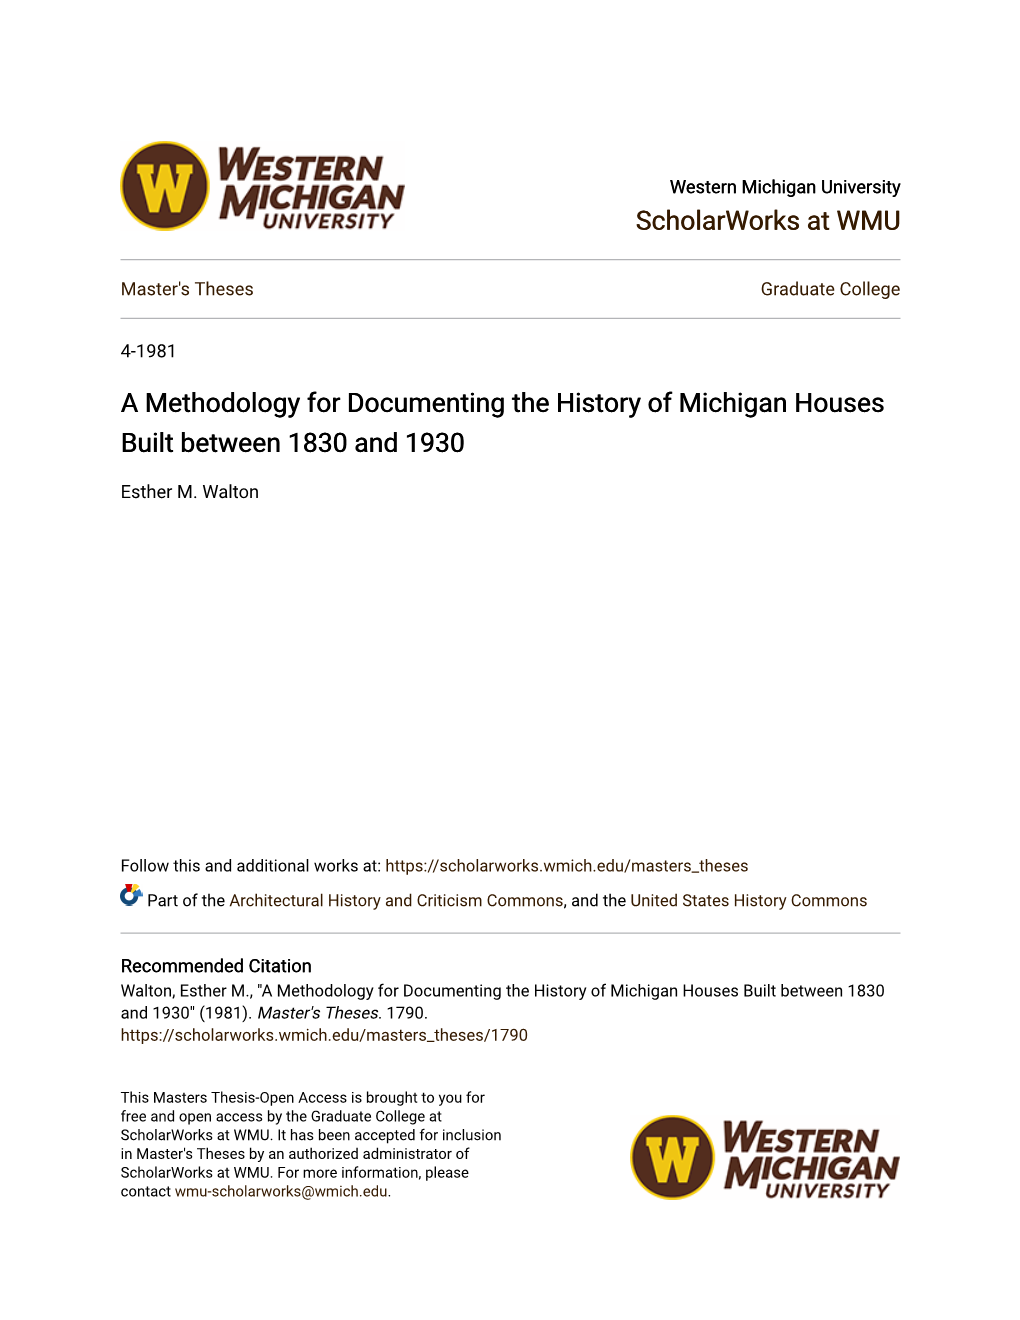 A Methodology for Documenting the History of Michigan Houses Built Between 1830 and 1930